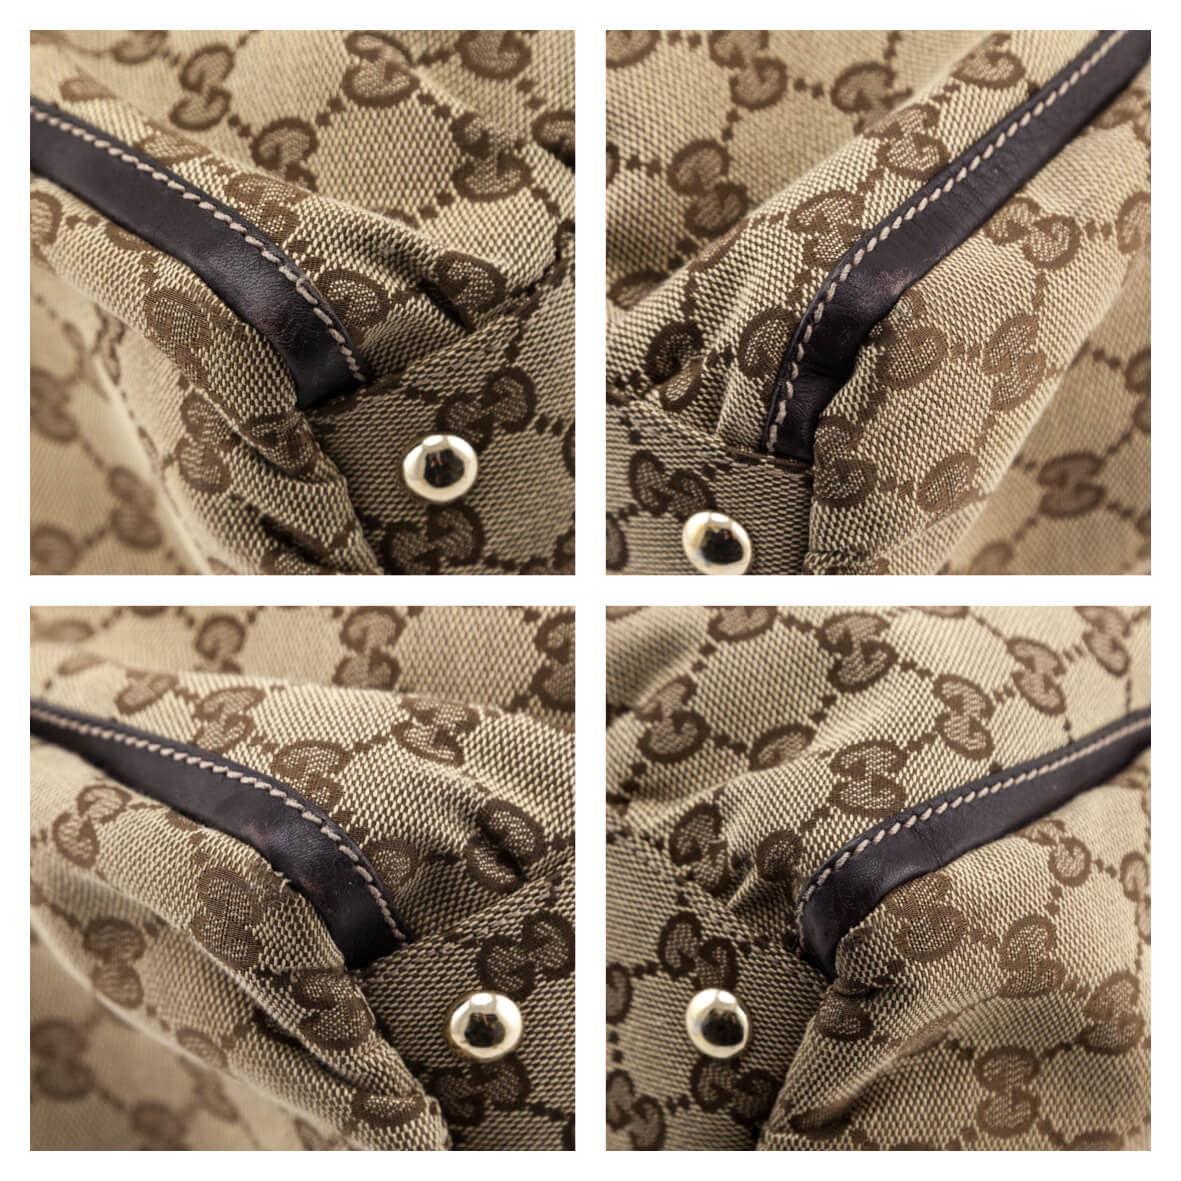 Gucci Beige GG Monogram Abbey D-Ring Large Tote - Love that Bag etc - Preowned Authentic Designer Handbags & Preloved Fashions